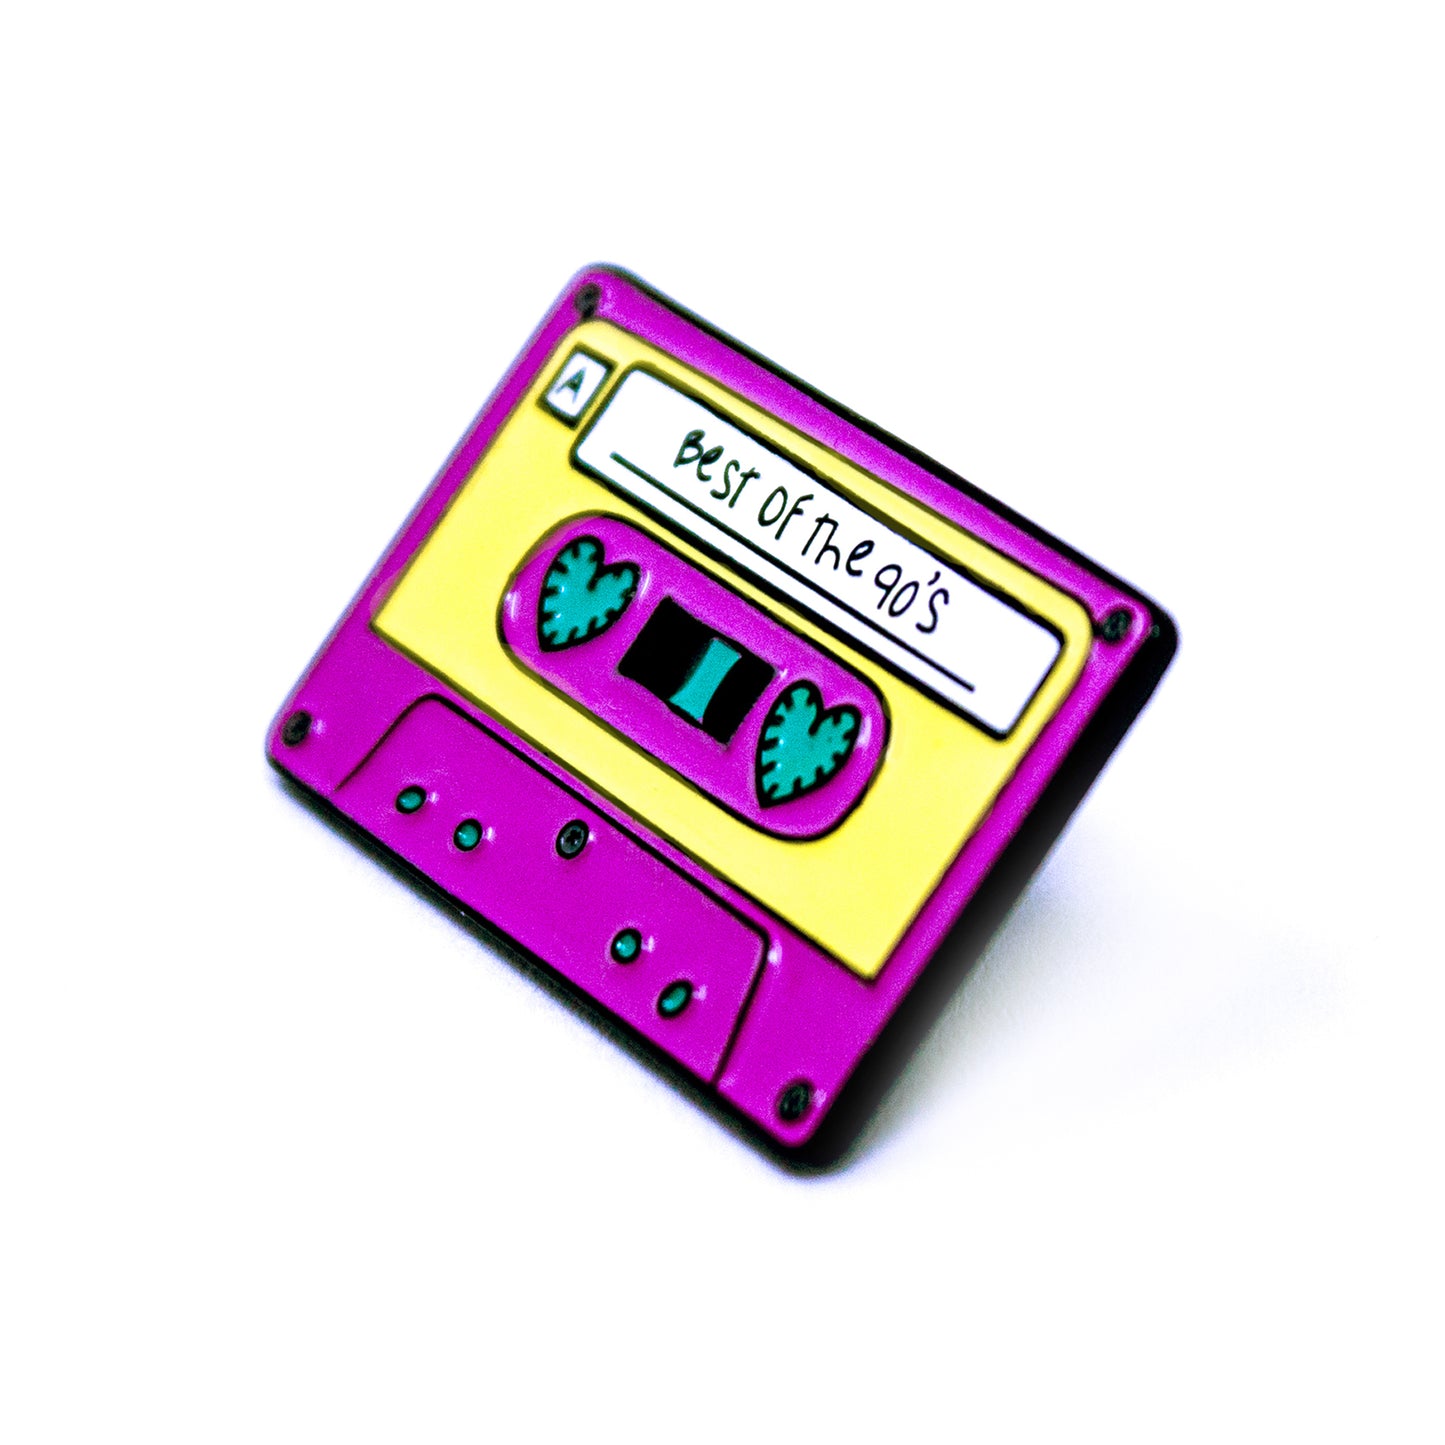 Pin Cassette Best Of the 90´s Sarosa.